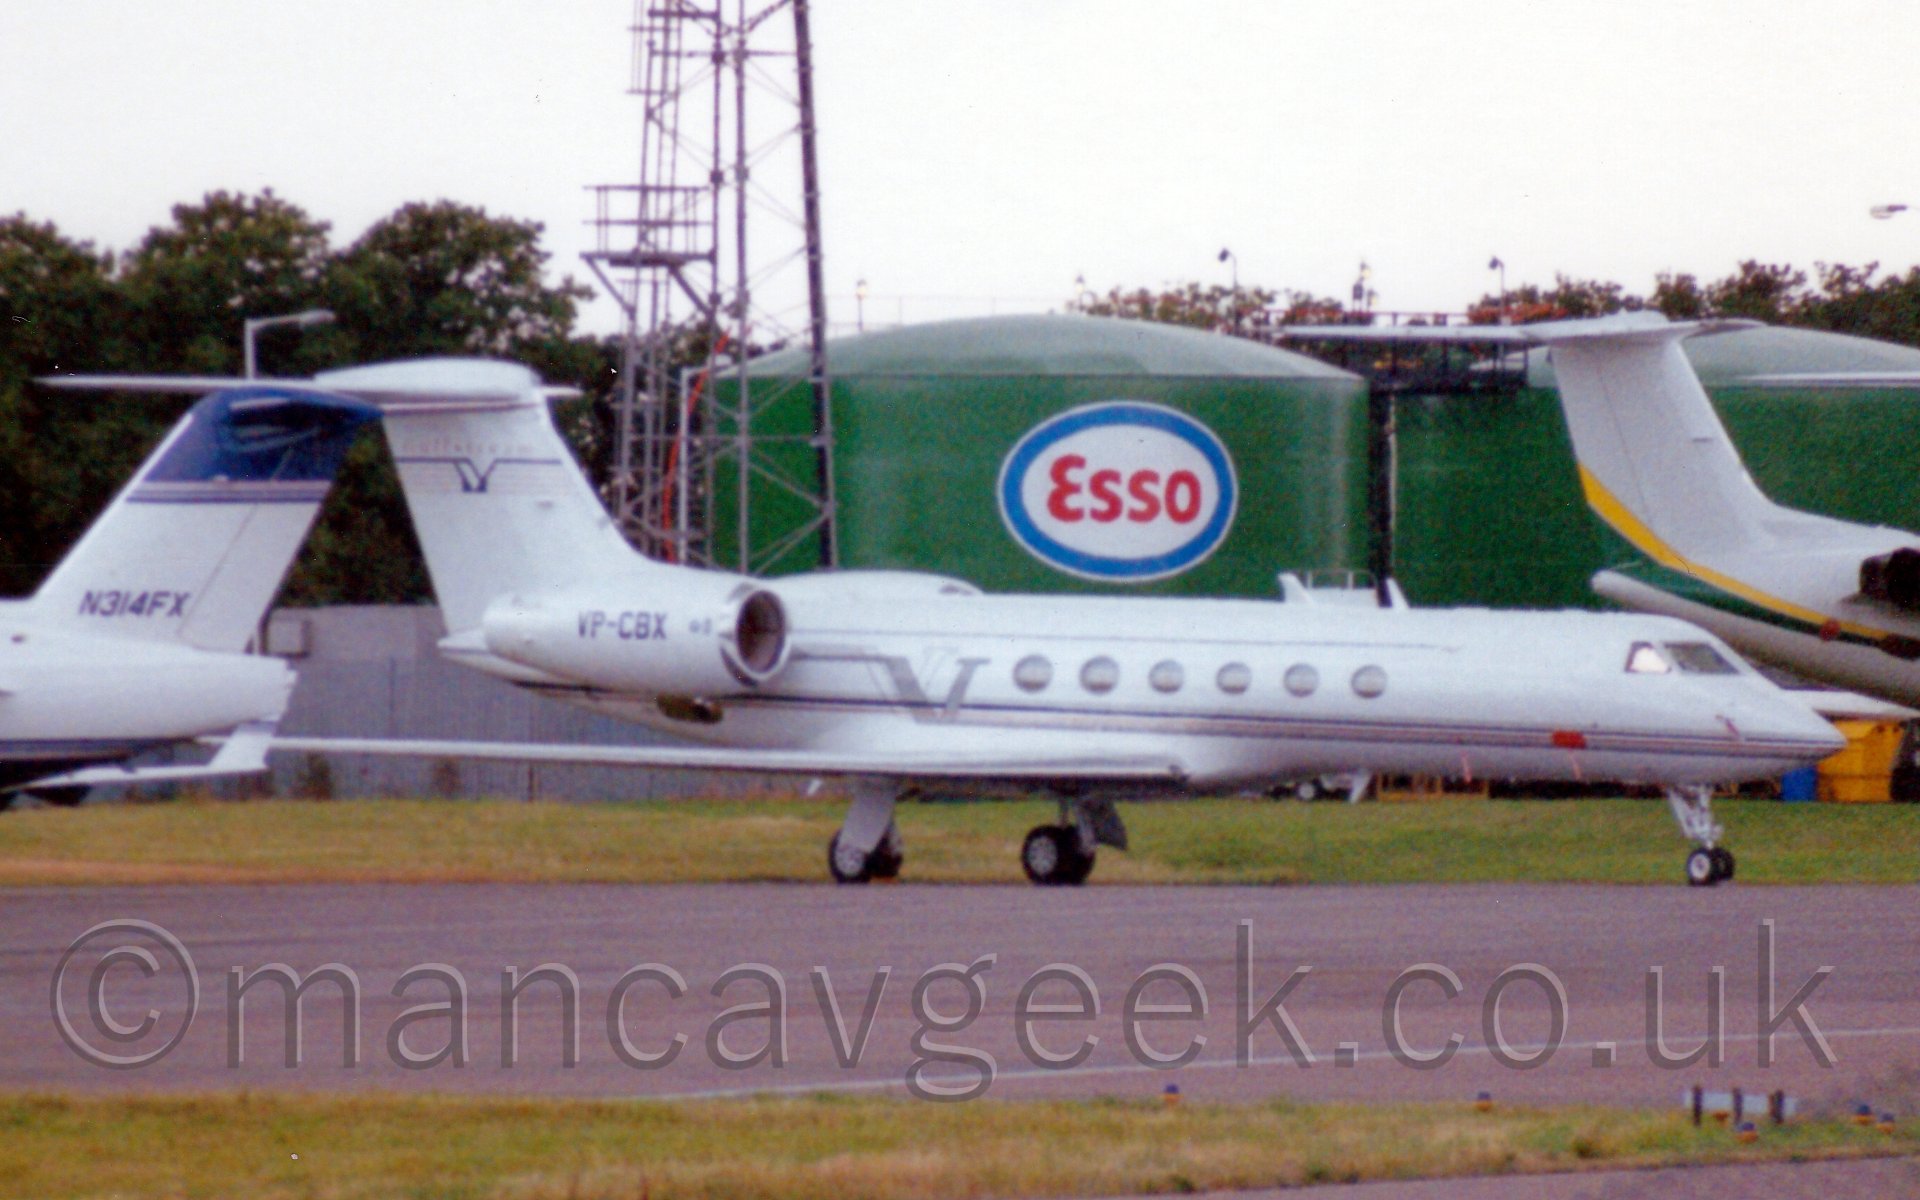 Slightly grainy side view of a white, twin engined bizjet parked facing to the right, with green fuel tanks and the tails of another couple of bizjets in the background.